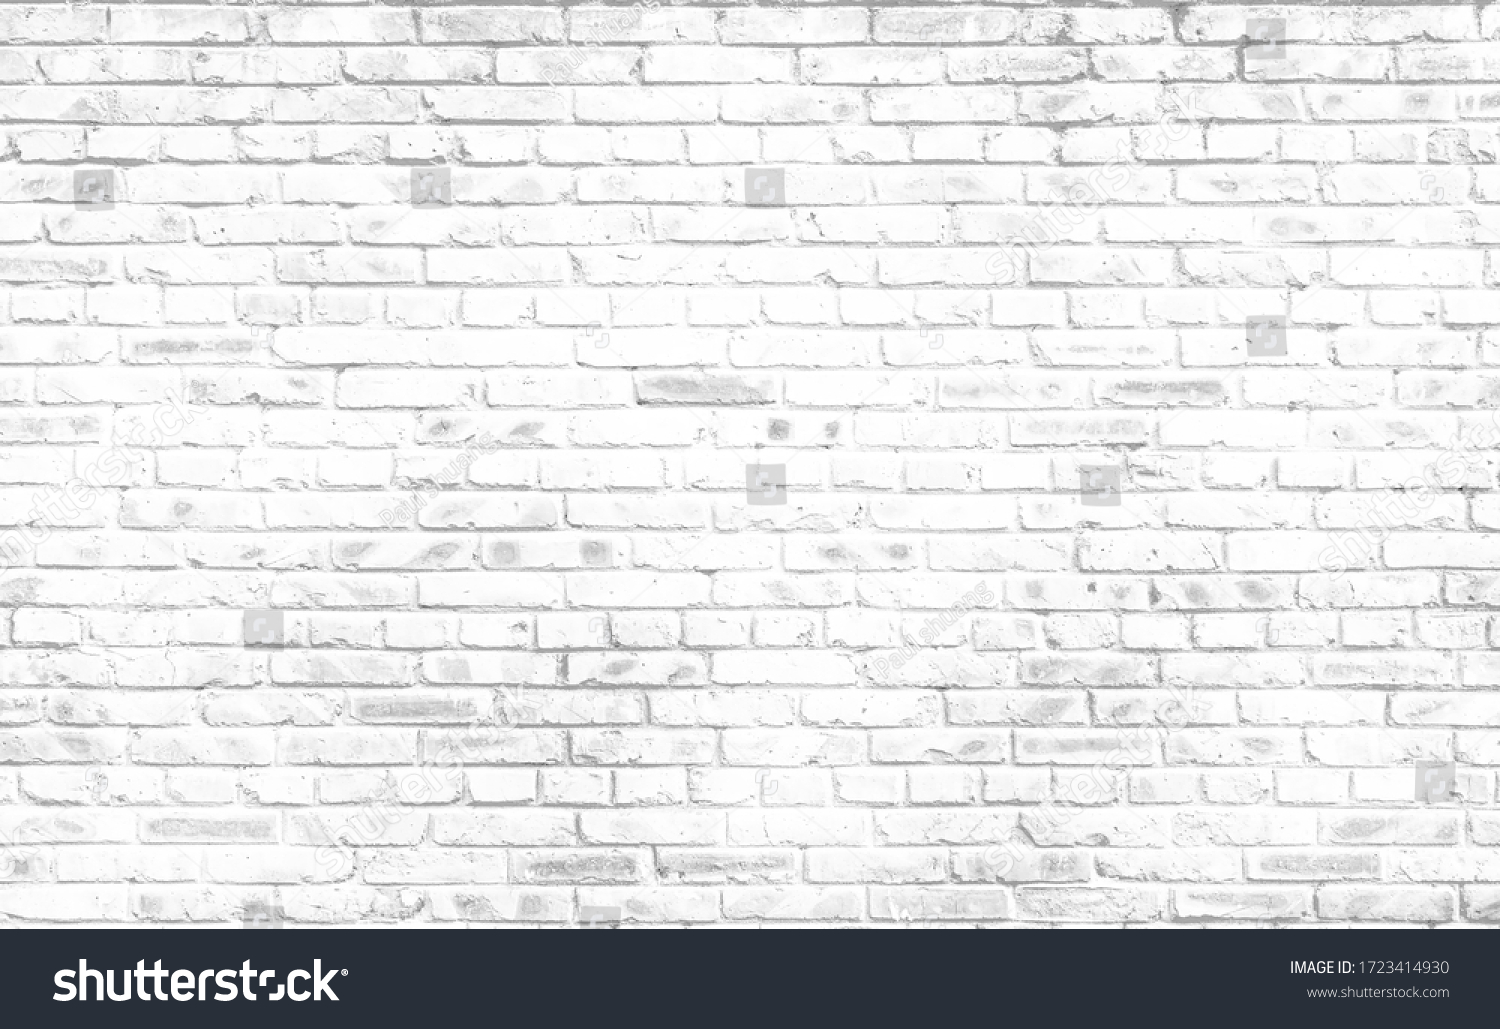 Abstract old white brick wall textured background #1723414930